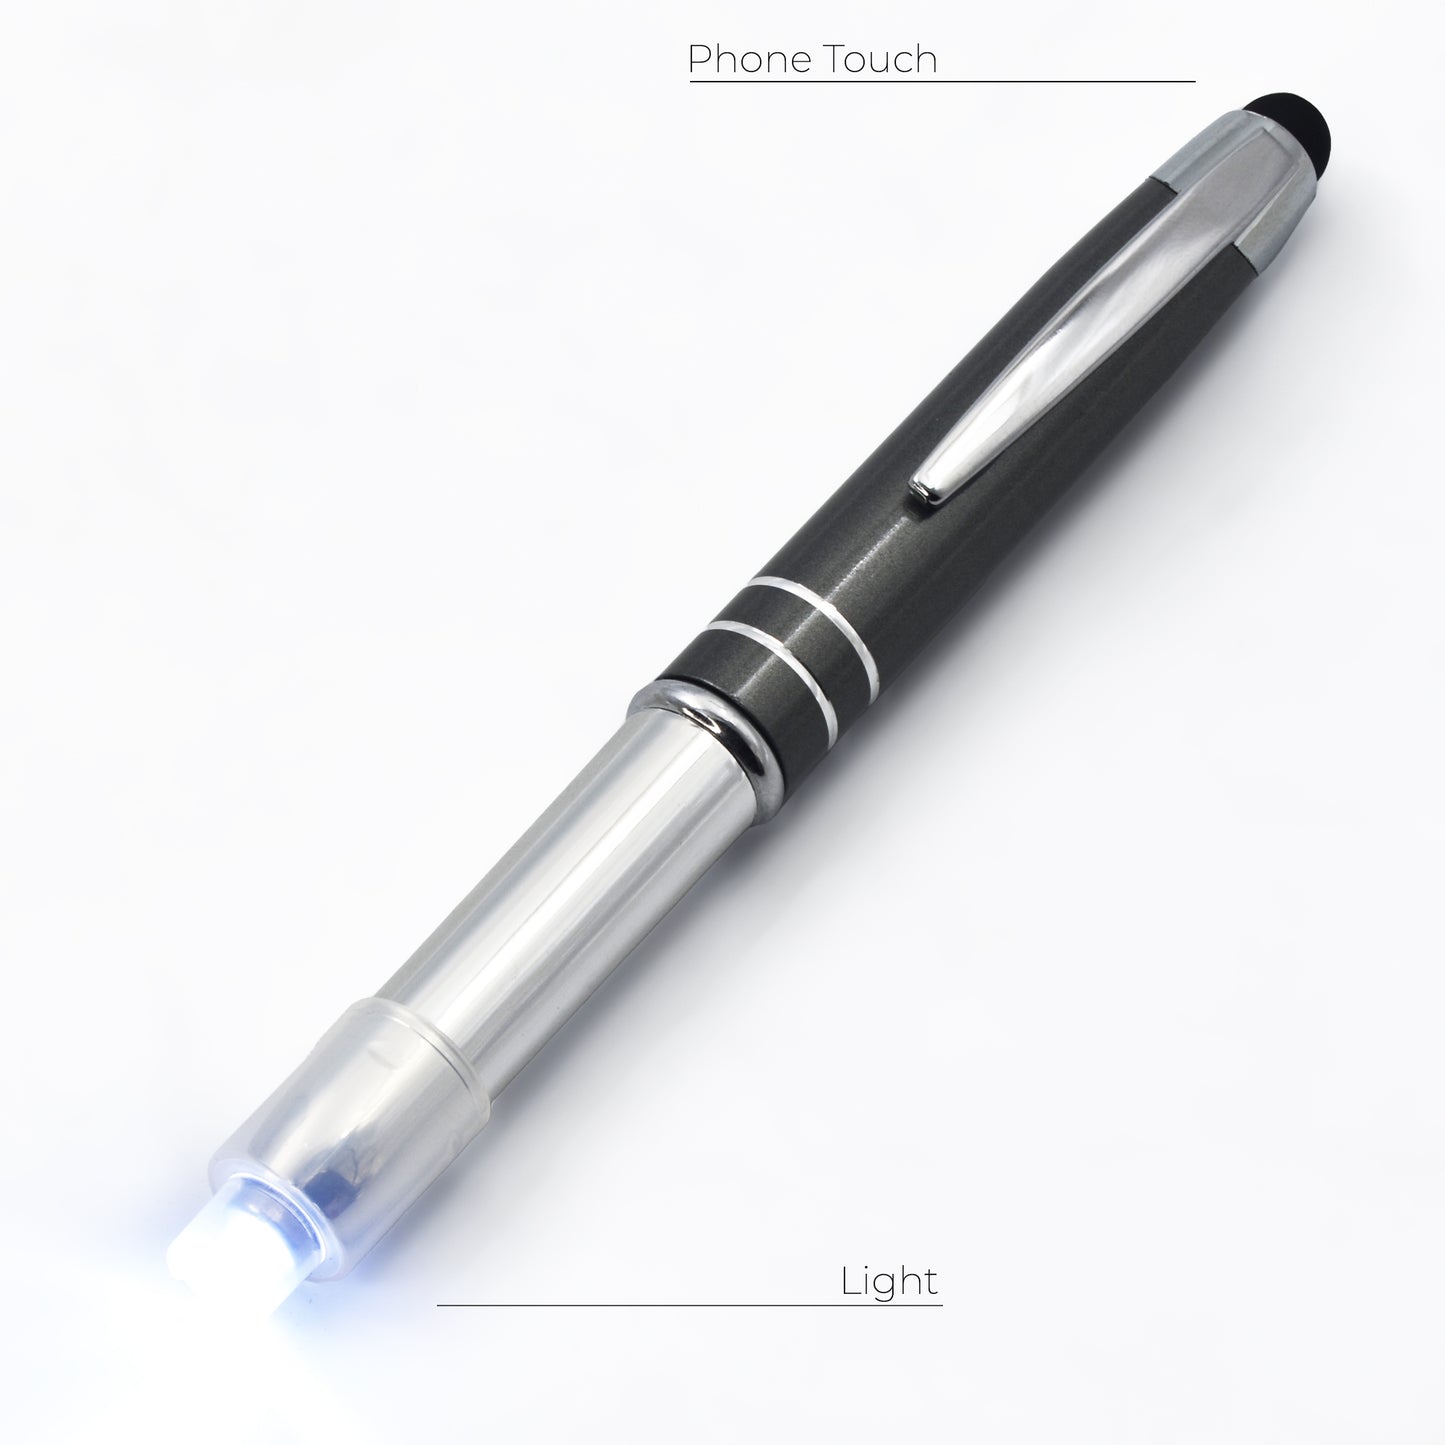 Light and Phone Touch Pen | Light & Touch Pen 1001